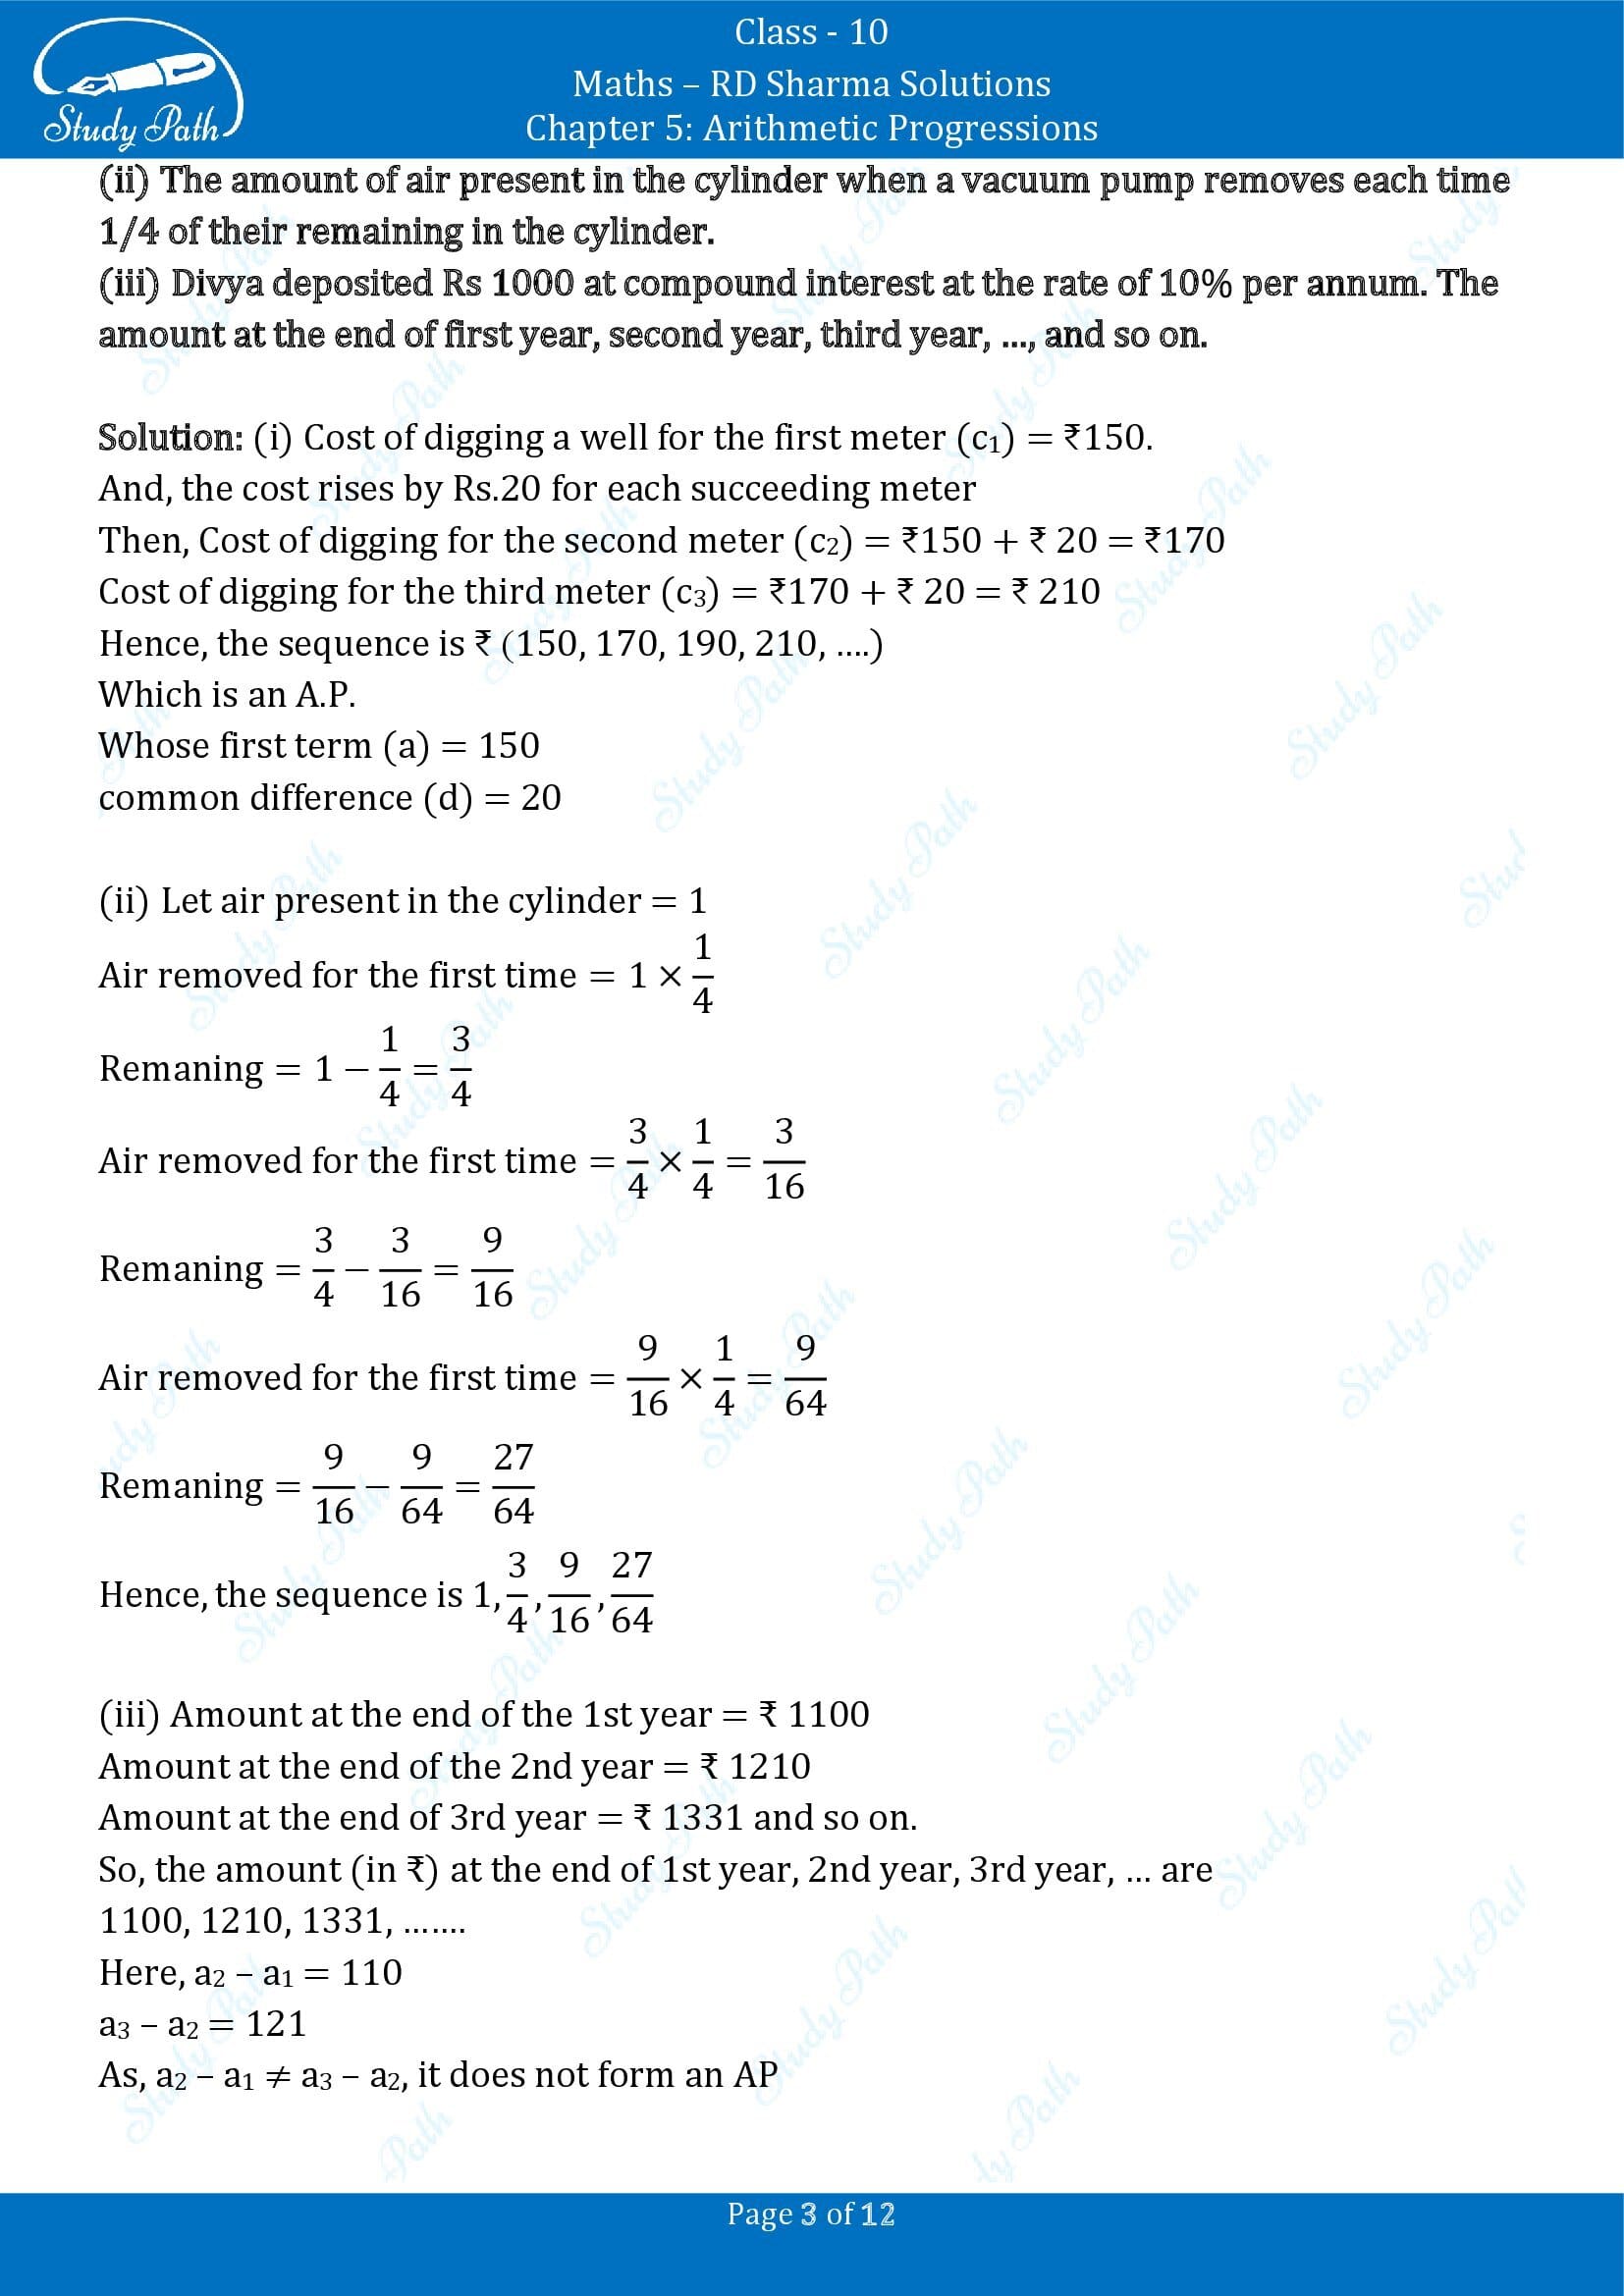 RD Sharma Solutions Class 10 Chapter 5 Arithmetic Progressions Exercise 5.3 00003